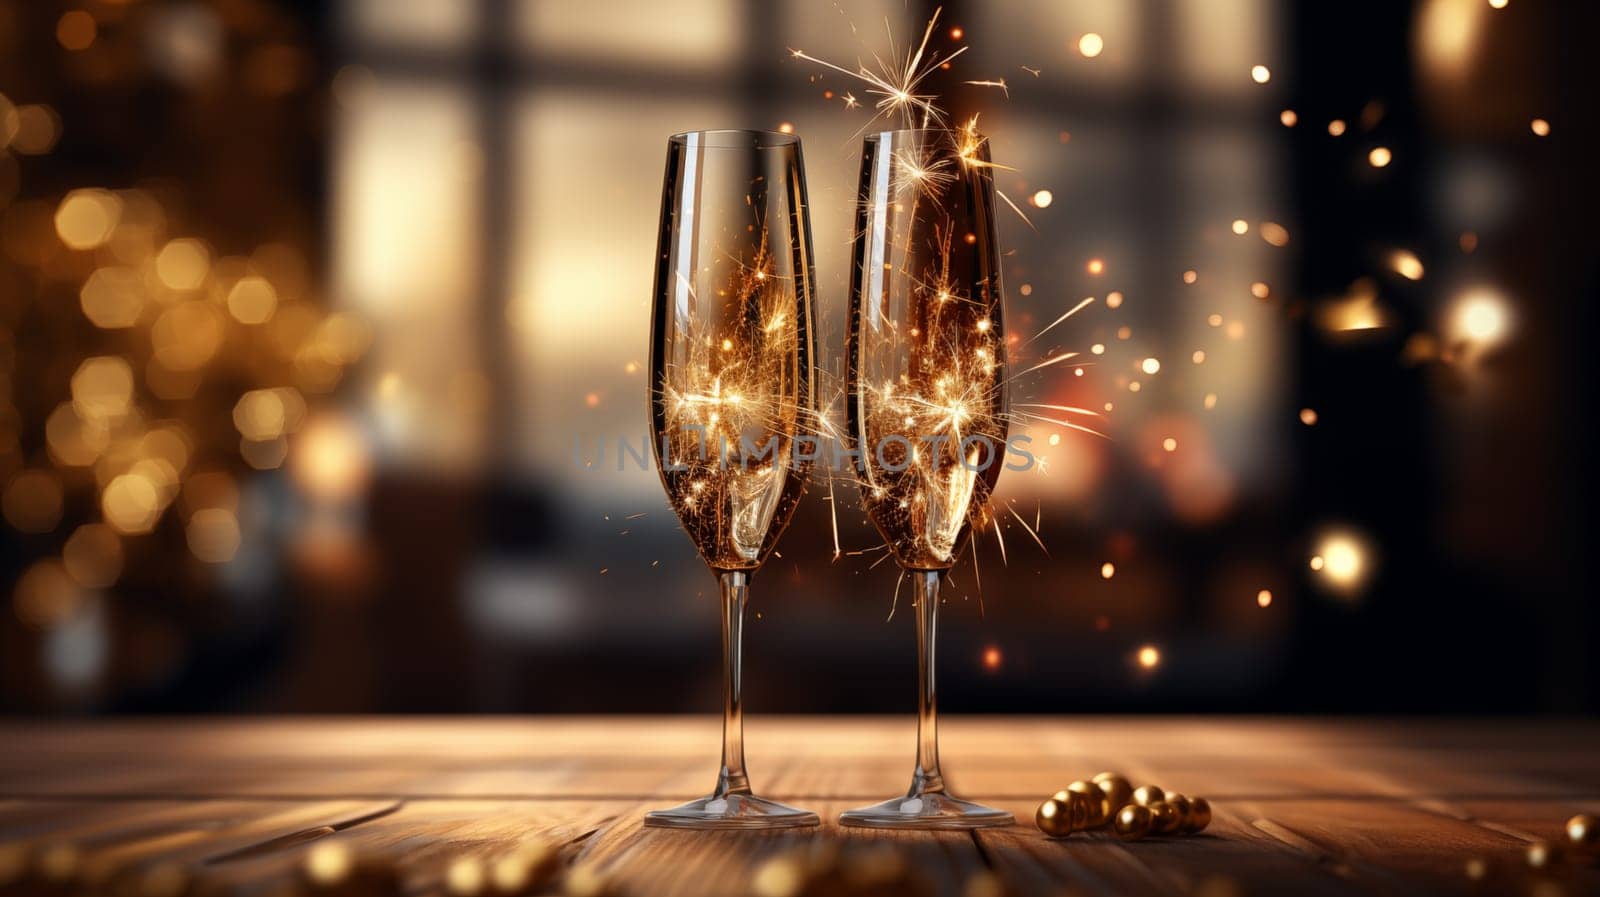 In the evening, there are two glasses of champagne on the table with a Bengali firework inside in the evening.